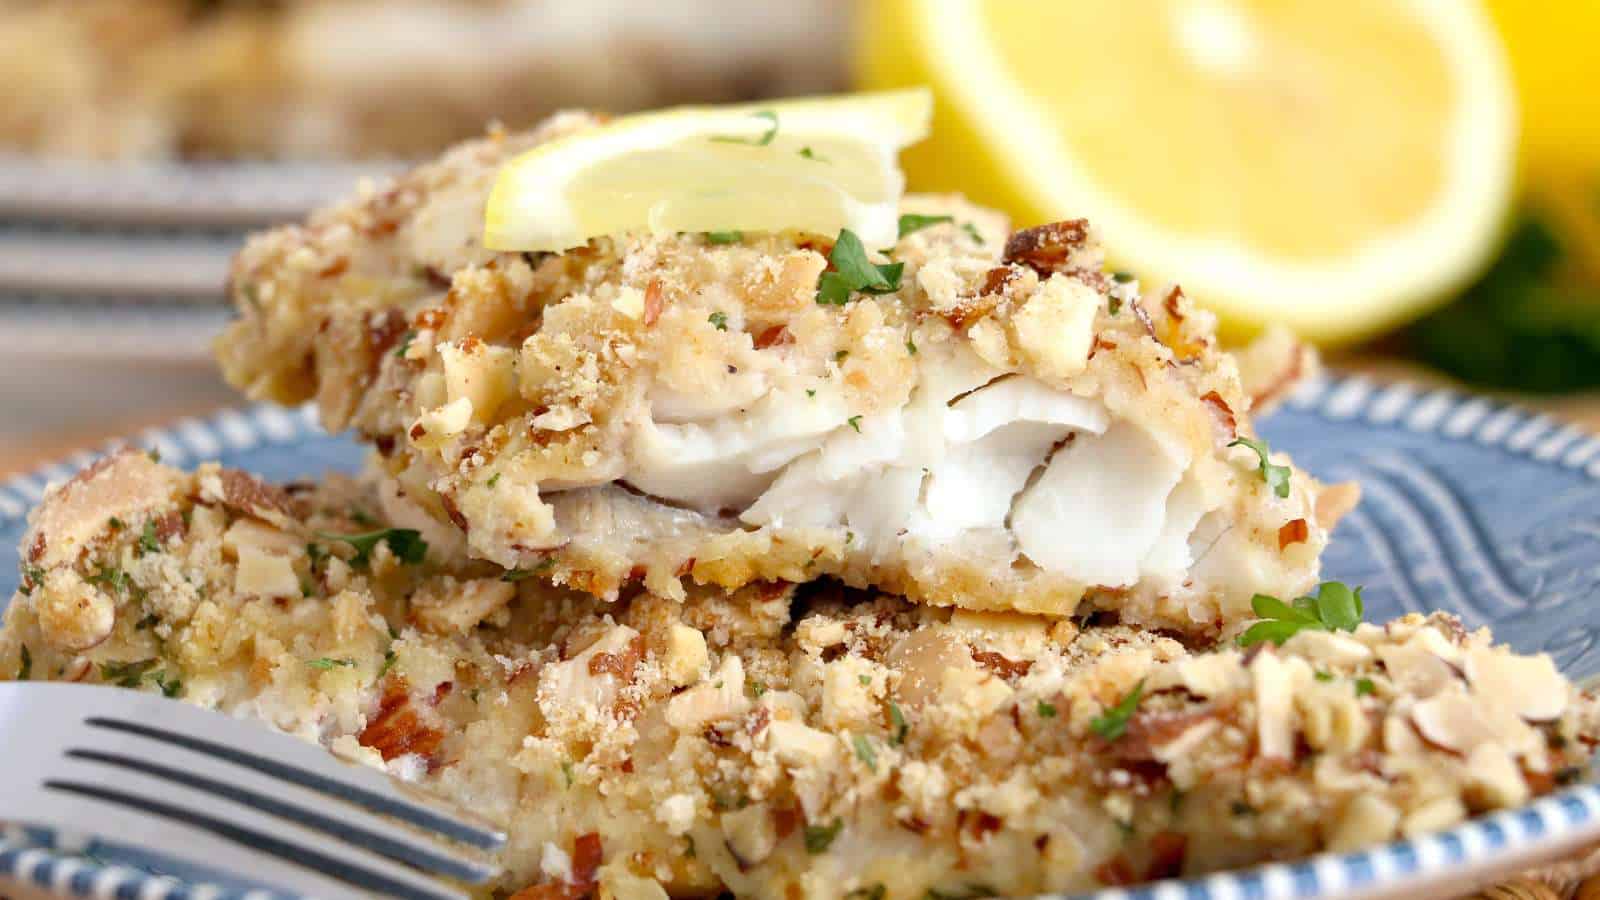 A plate of almond-crusted walleye or pickerel fish fillets with a fork and lemon.